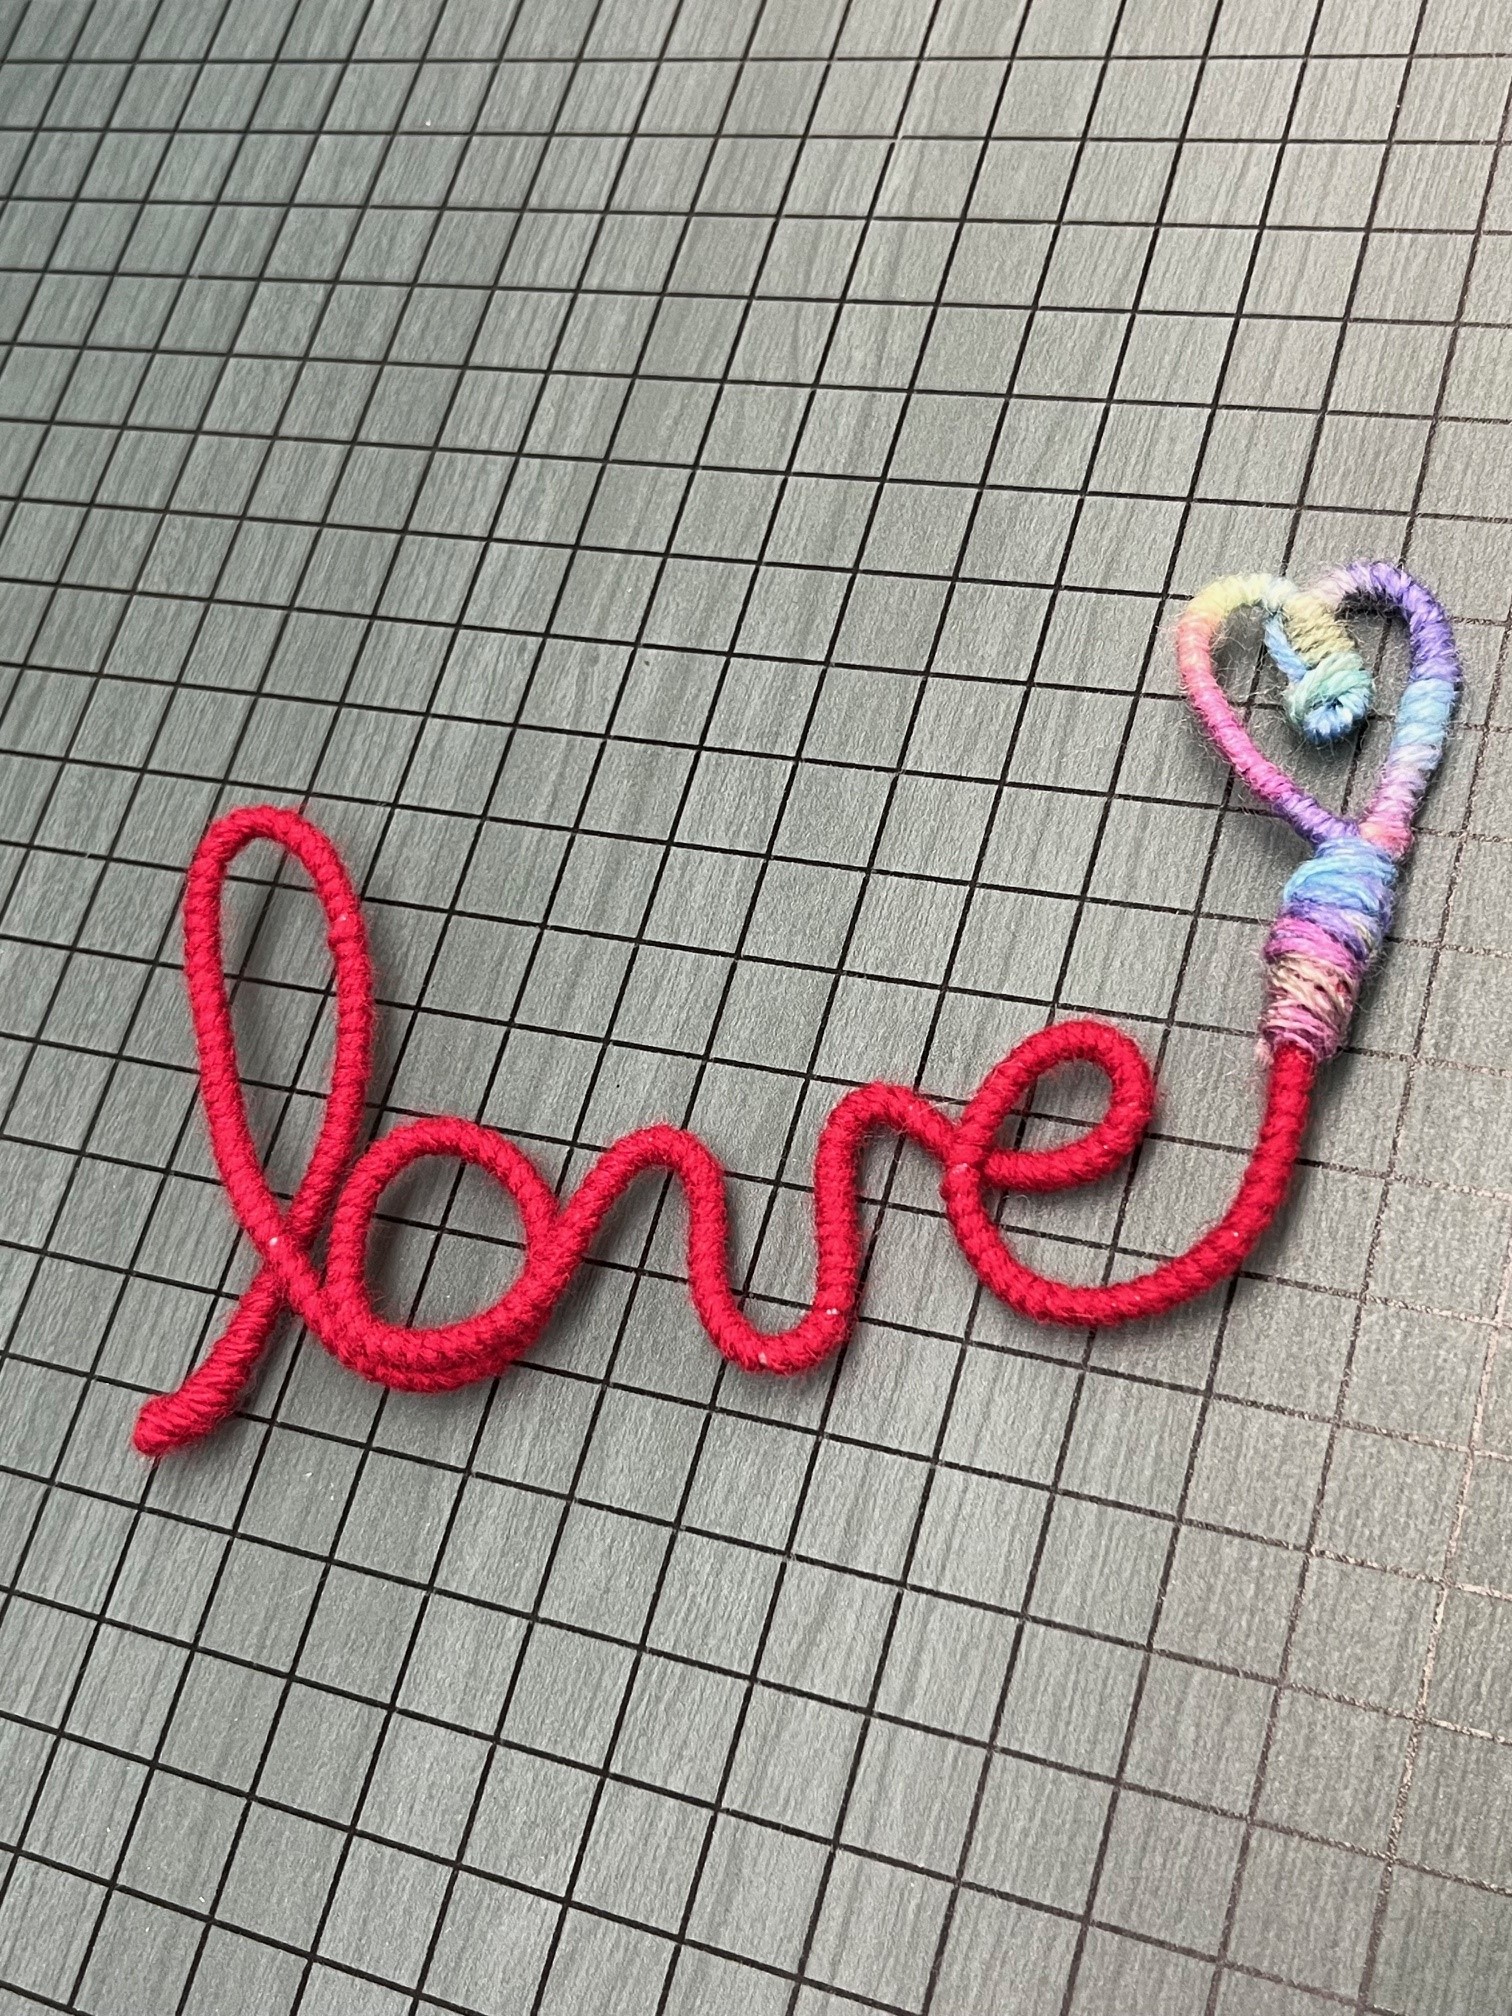 the word love written in script and wrapped with yarn